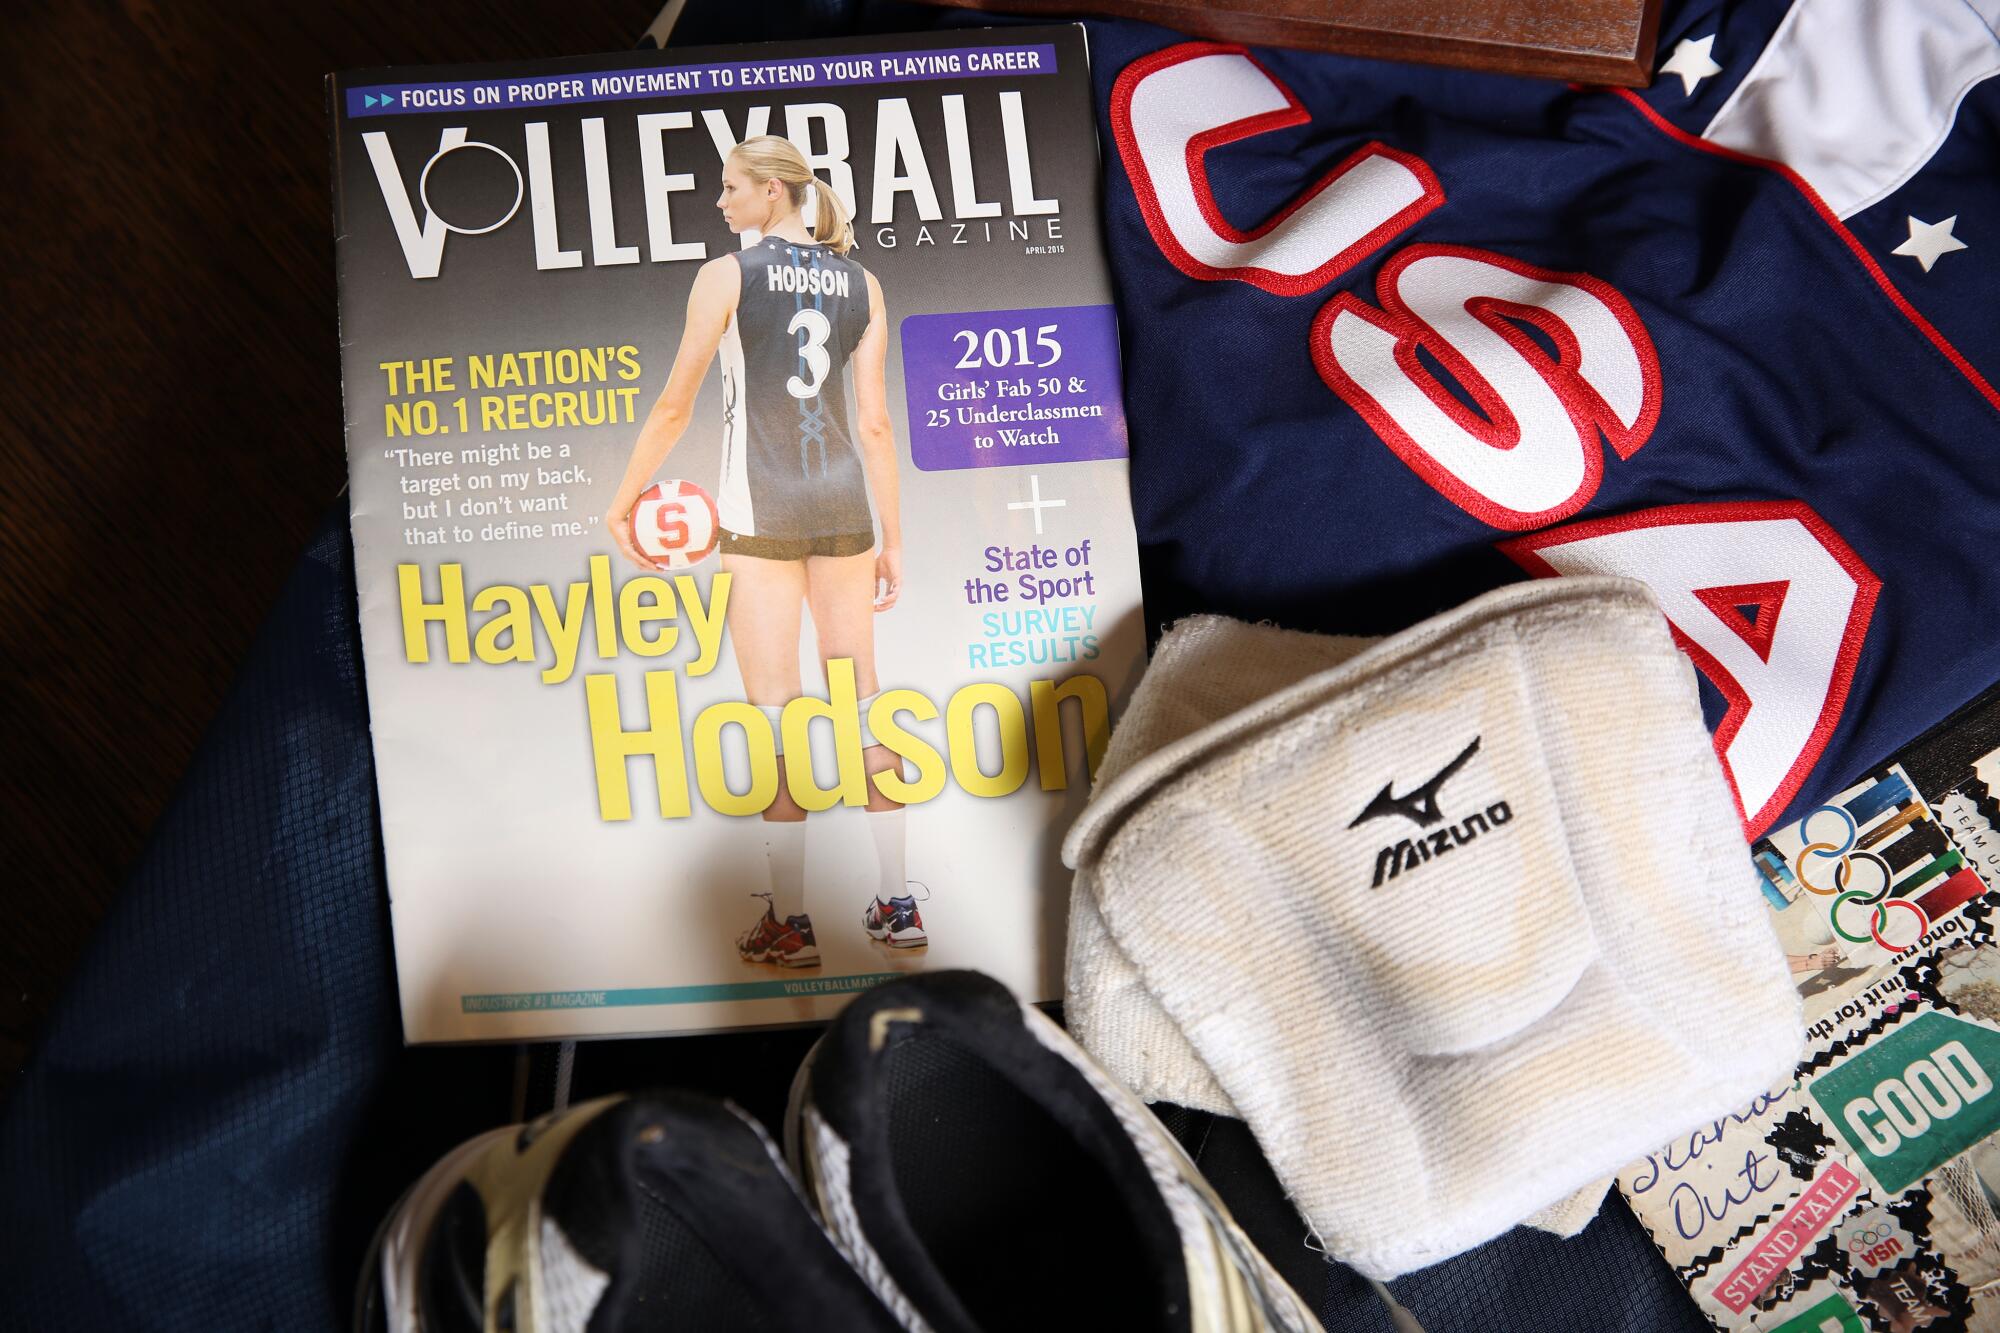 Hayley Hodson on the cover of Volleyball Magazine in 2015.